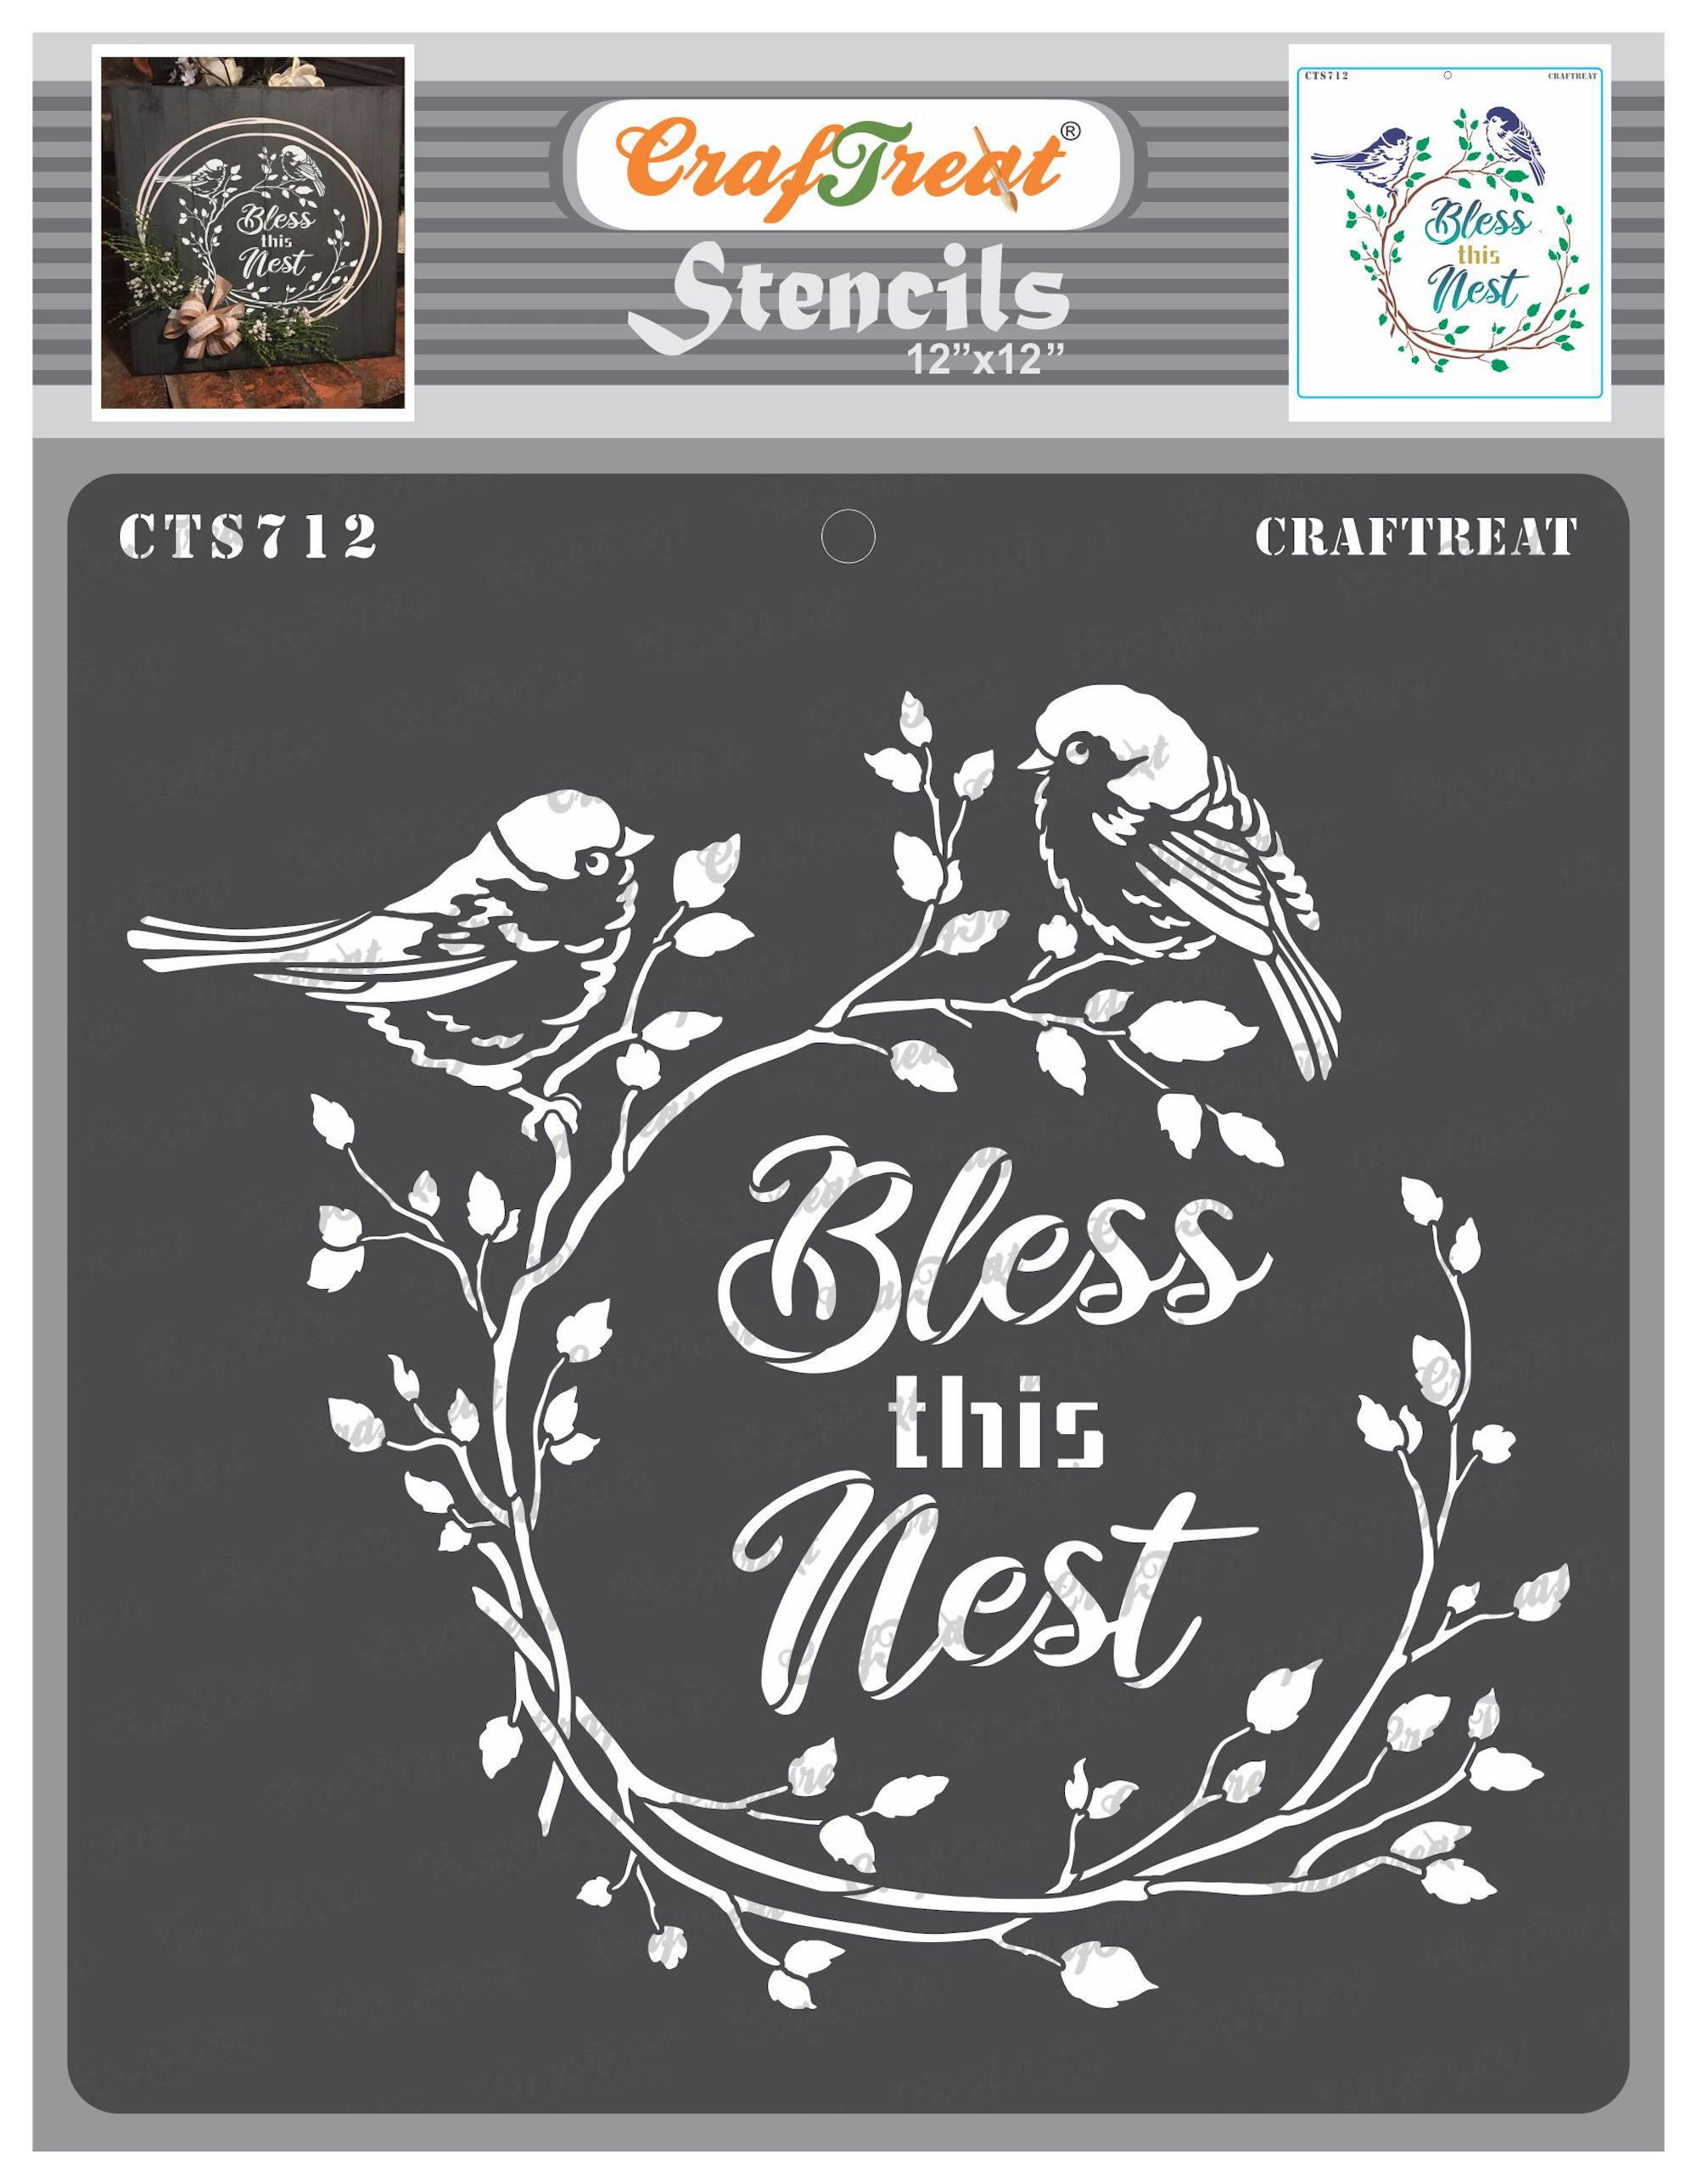 CrafTreat Bless this Nest Stencil for Painting and Crafting - 12x12 